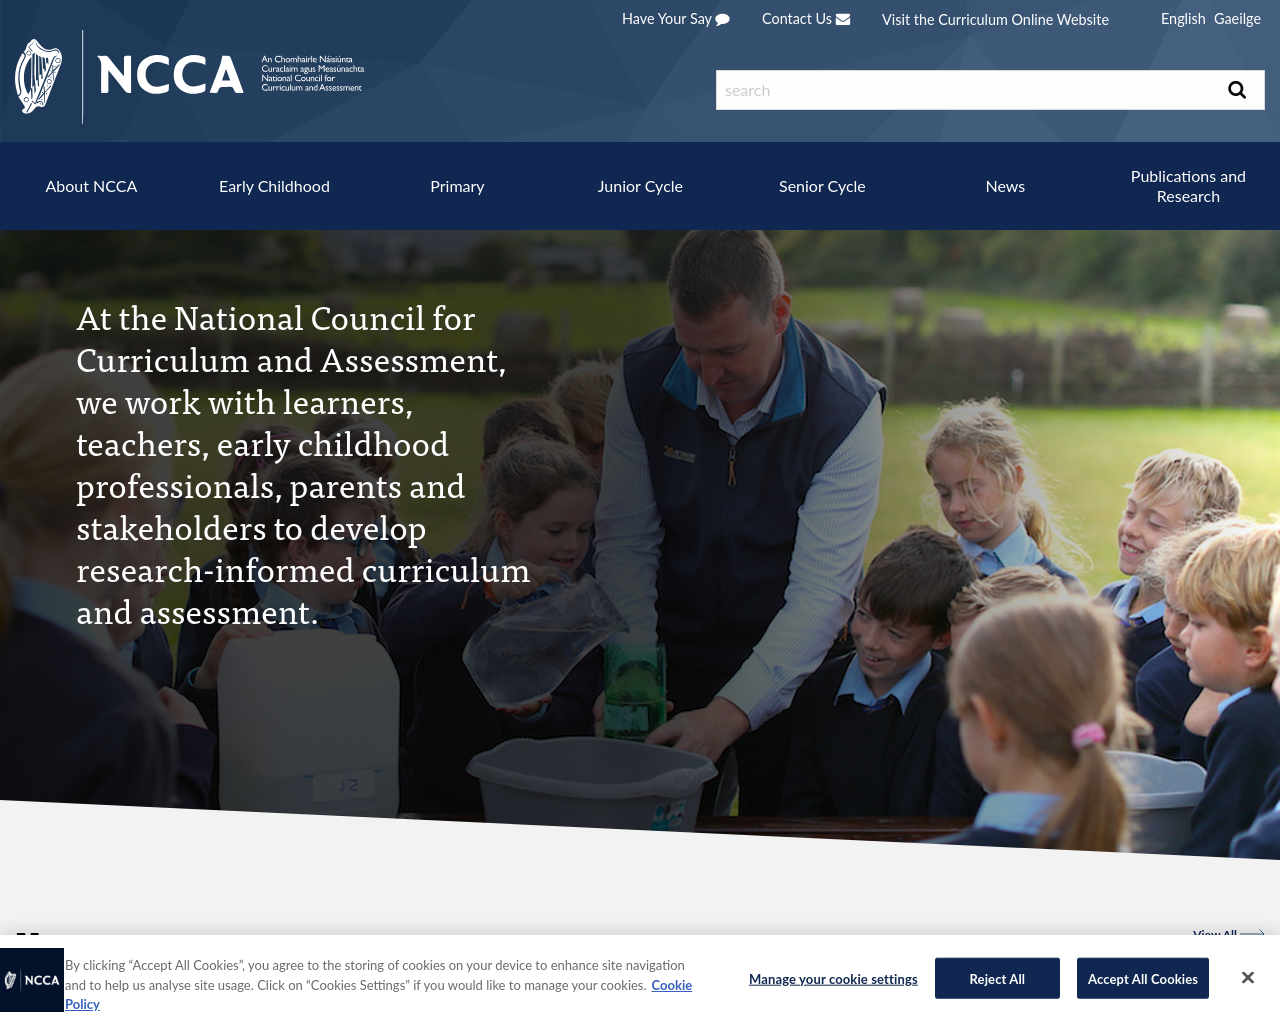 National Council for Curriculum and Assessment (ncca.ie)